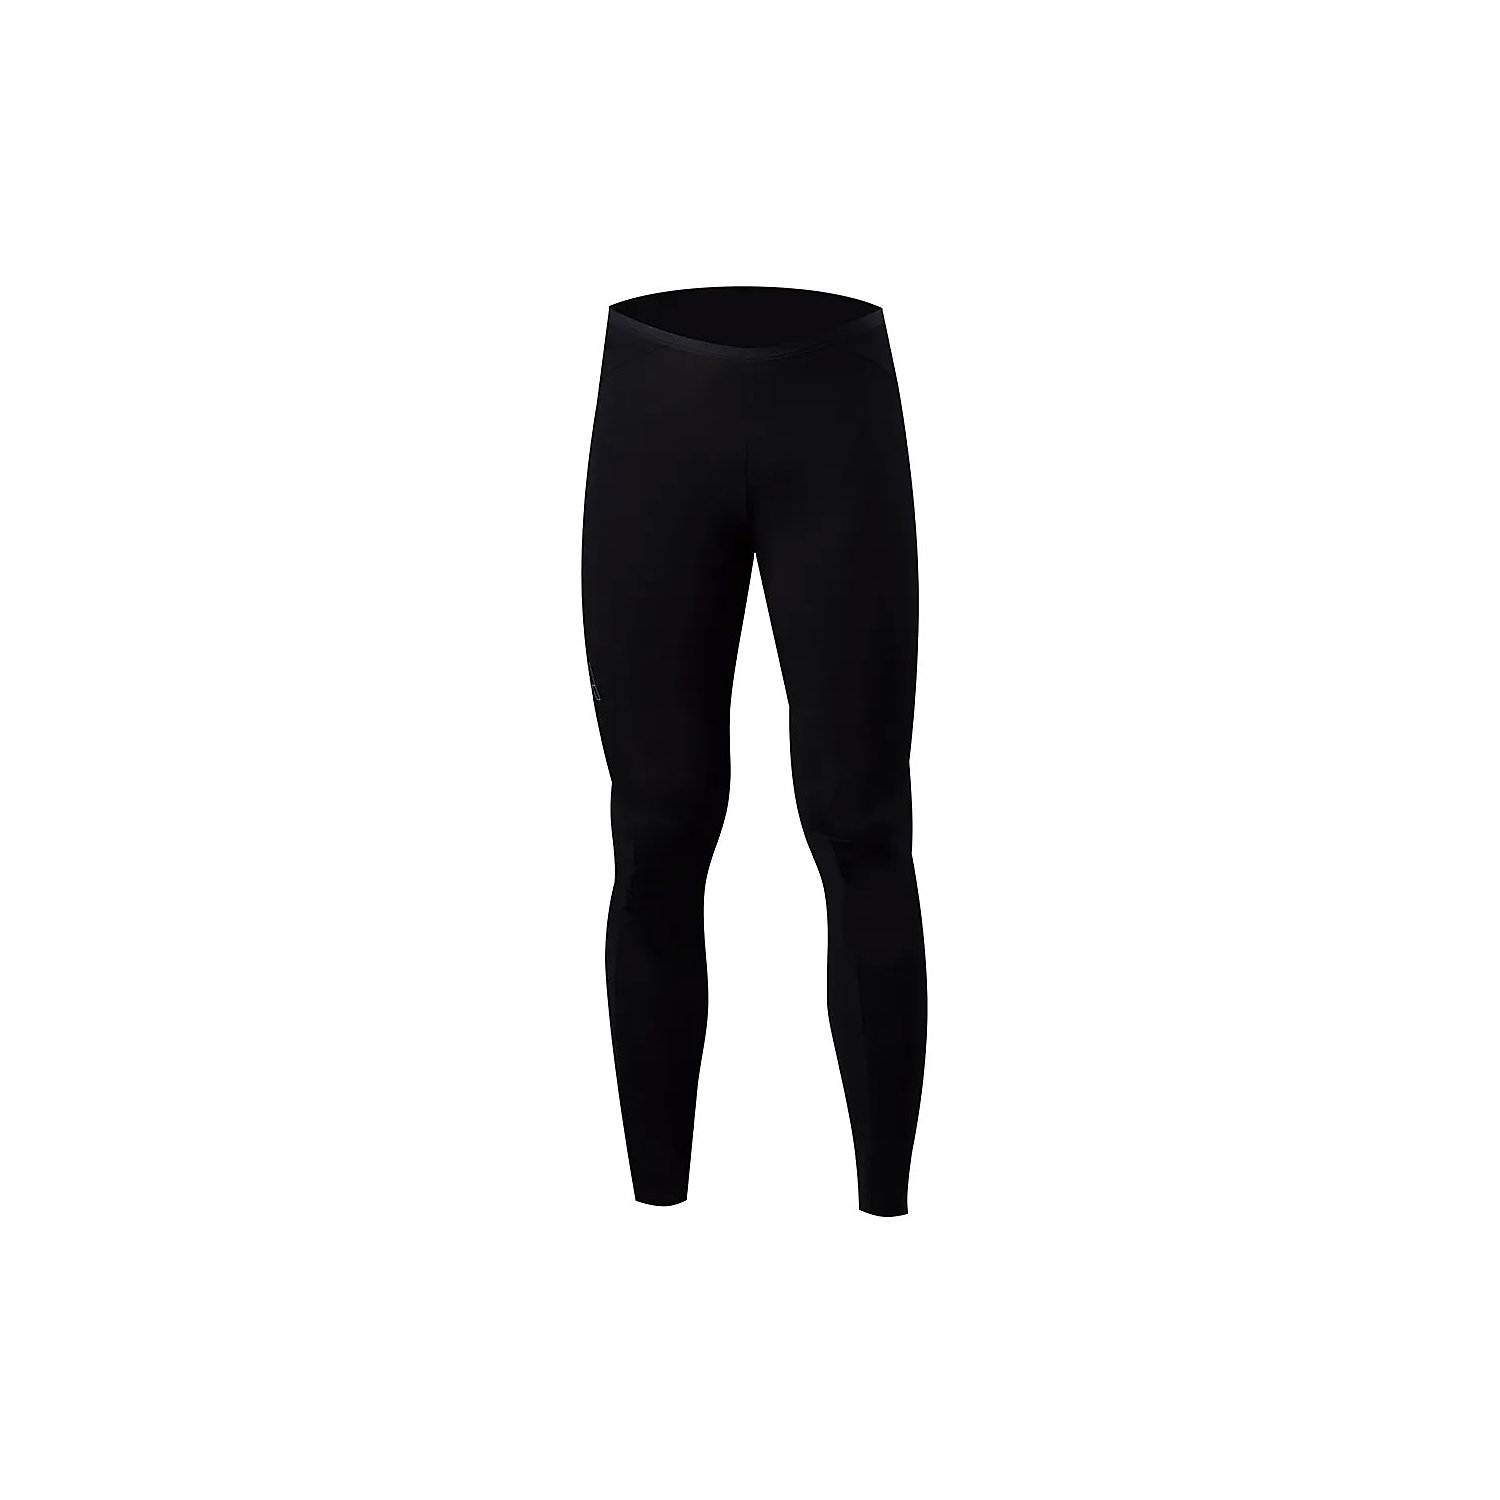 7mesh Mens Seymour Trimmable Tight